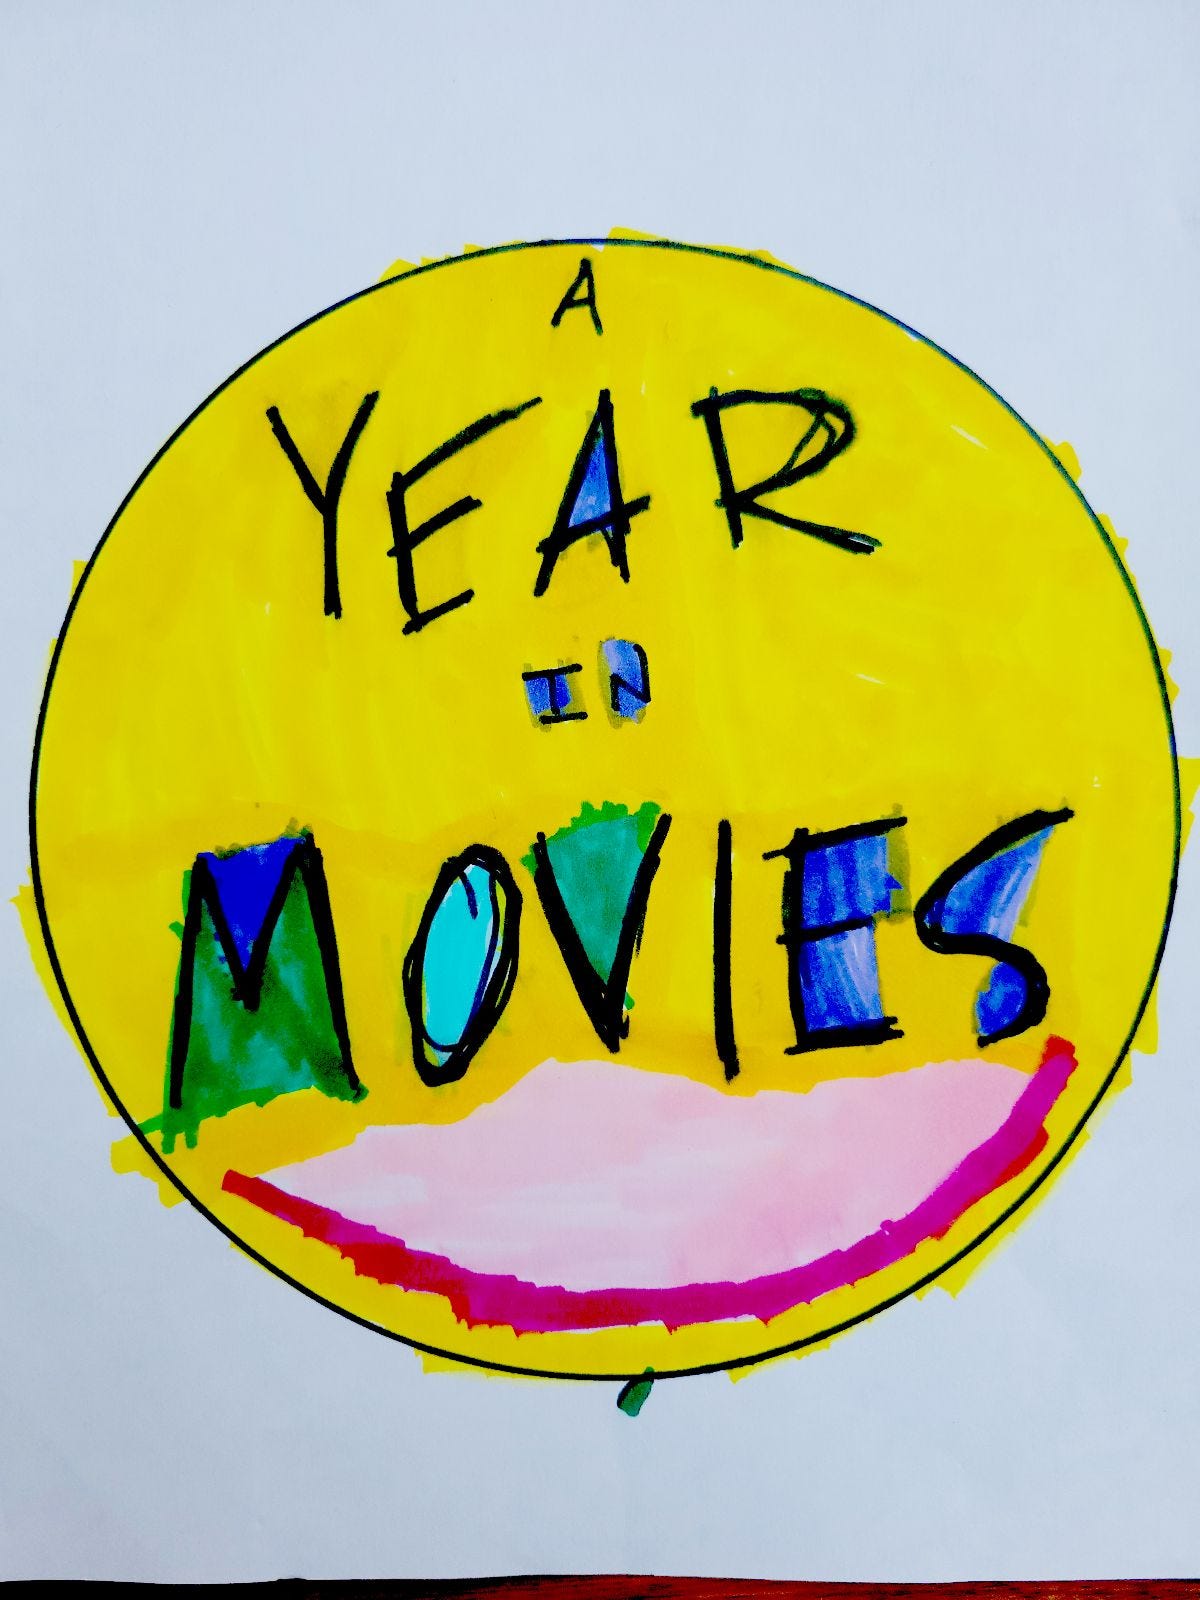 A Year in Movies